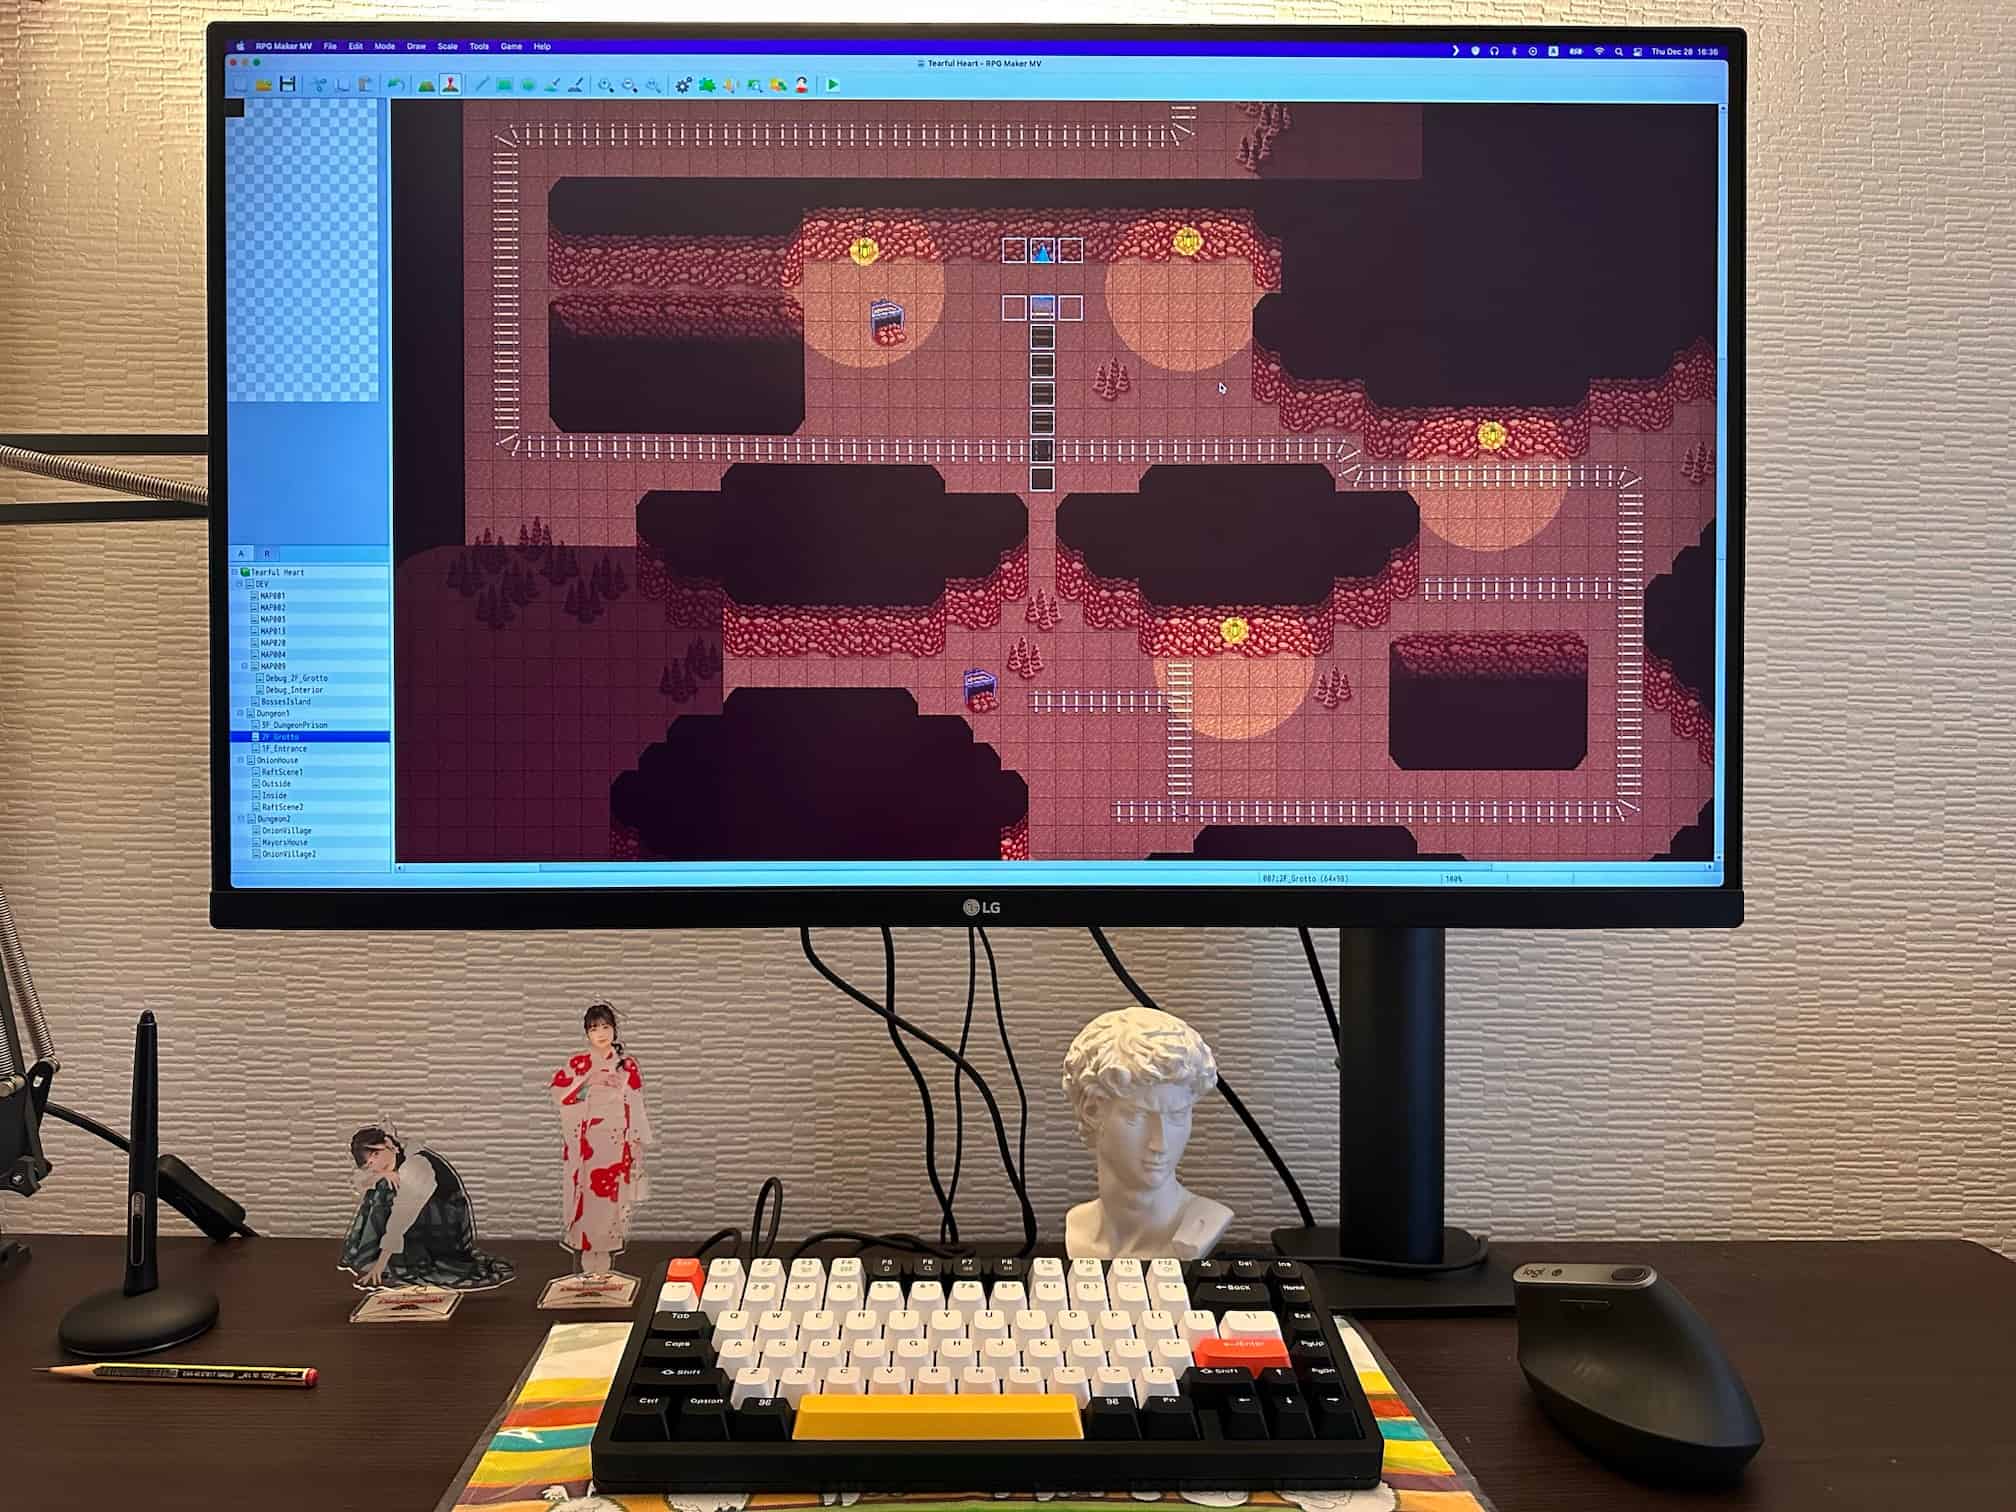 Computer monitor showcasing the RPG Maker MV software interface, with an in-progress game level design. The desk setup includes a mechanical keyboard, a Wacom graphic tablet pen, a vertical mouse, and two acrylic stand figures of Nako Misaki